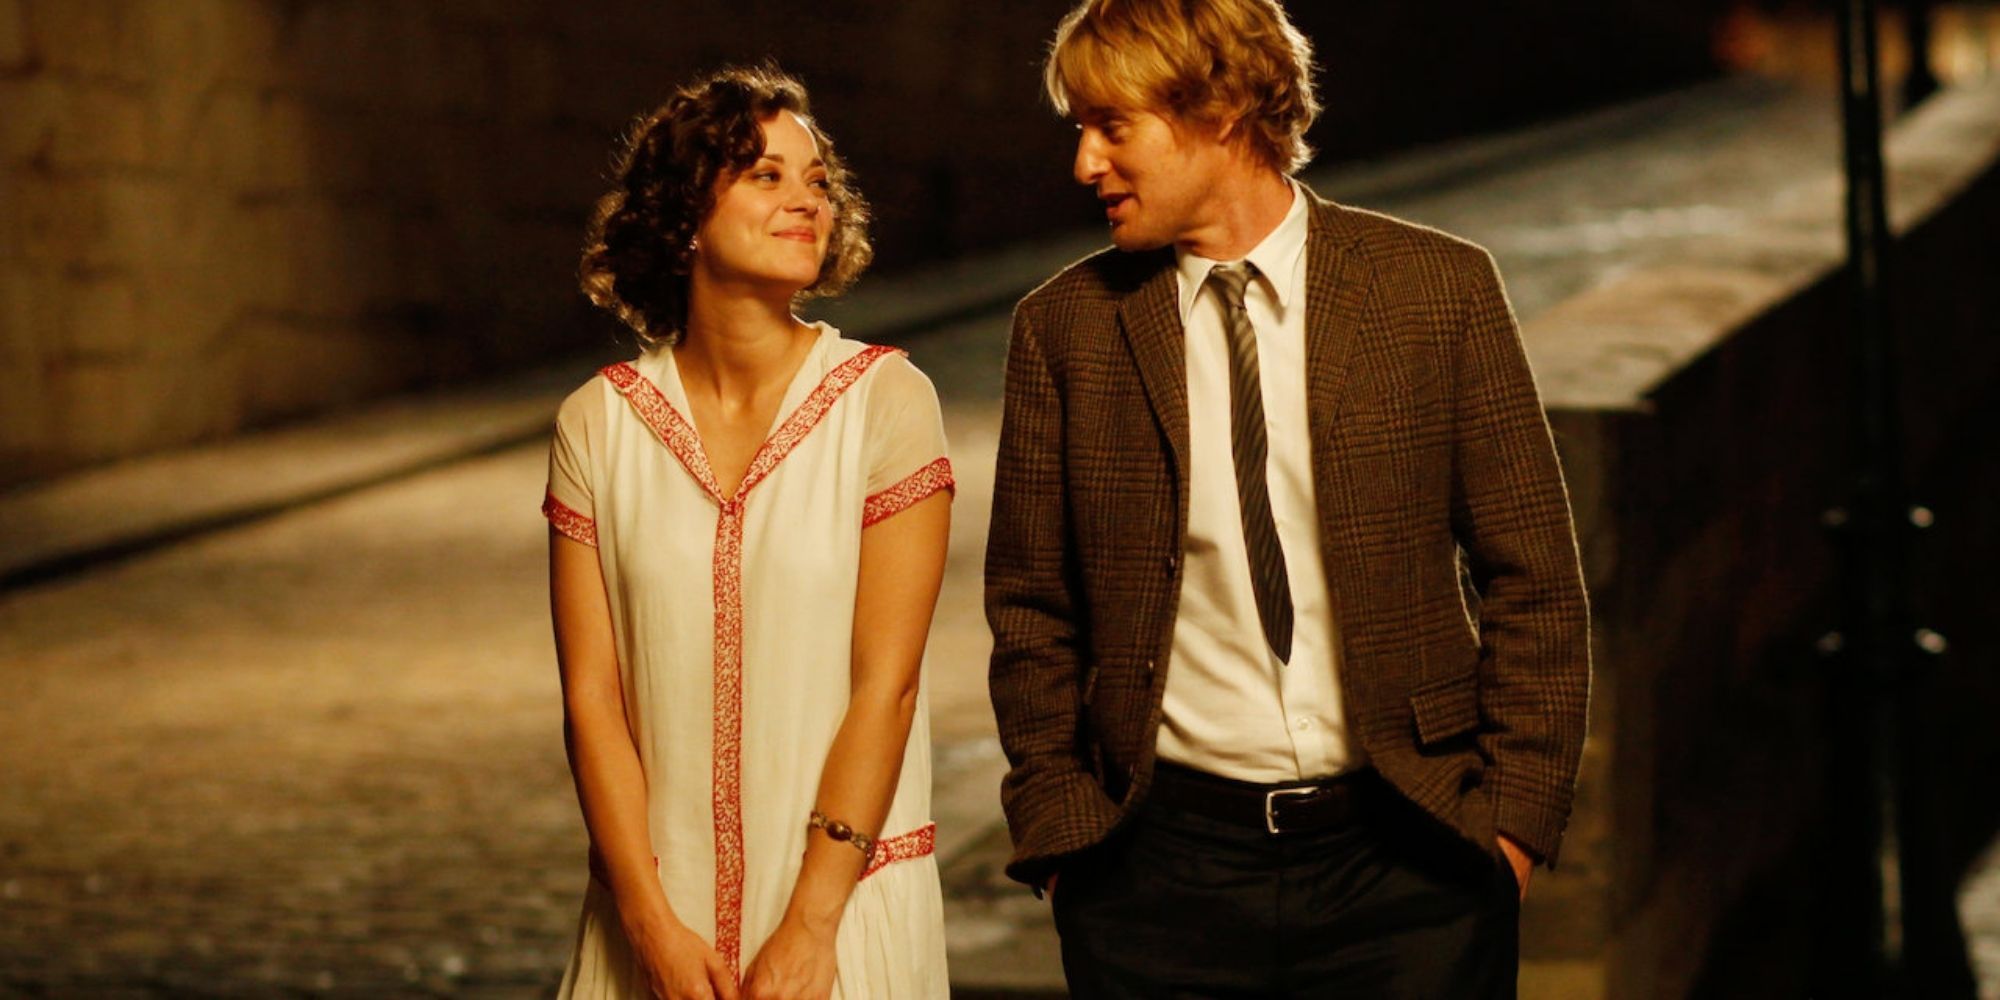 An image of the movie Midnight in Paris.